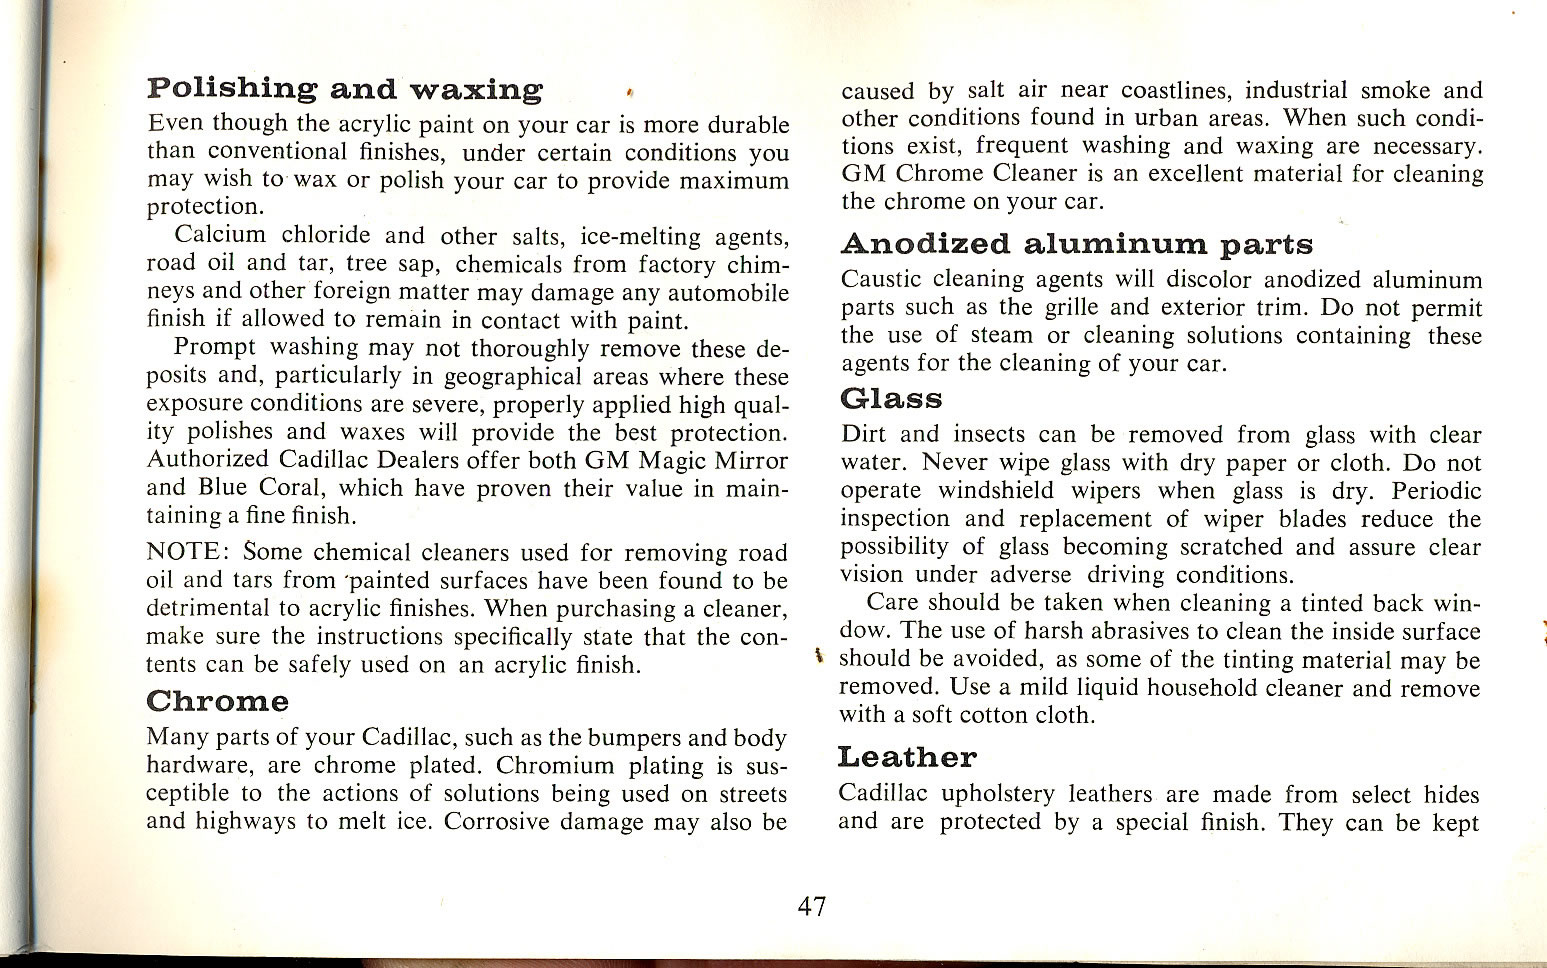 1965 Cadillac Owners Manual Page 19